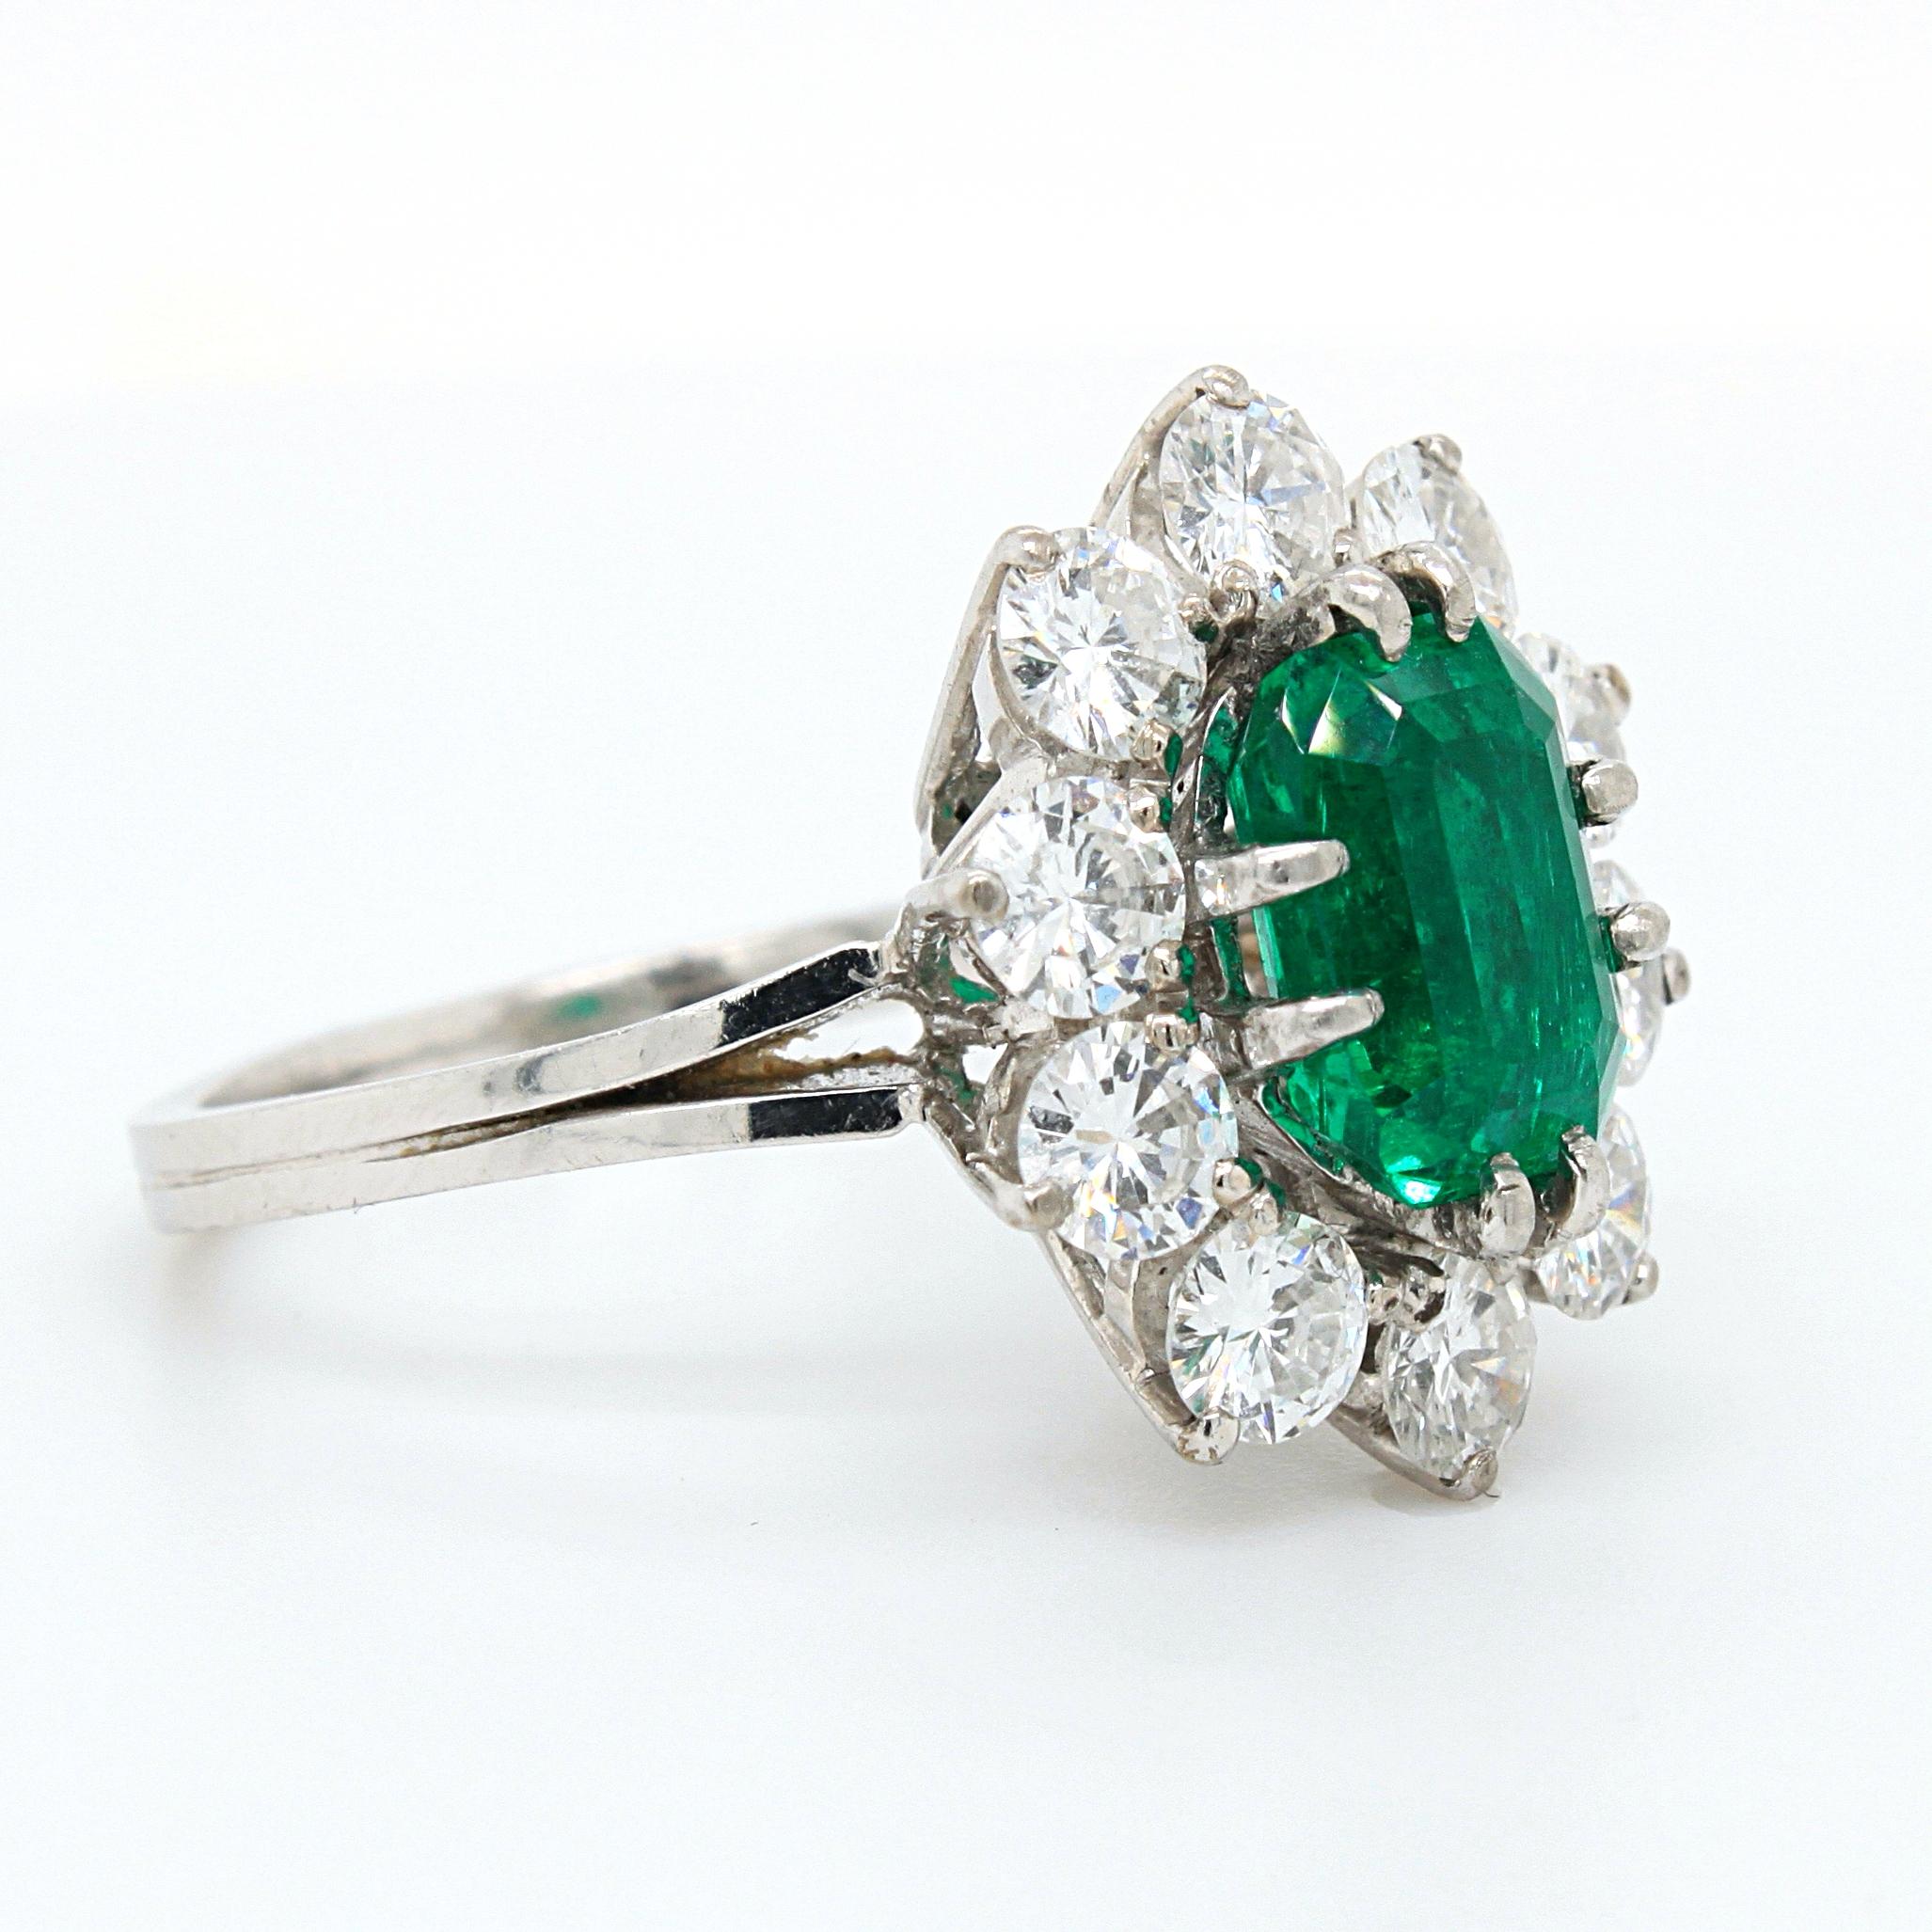 Columbian Emerald 'Minor-Oil', 1.88ct, and Diamond Ring, France For Sale 3